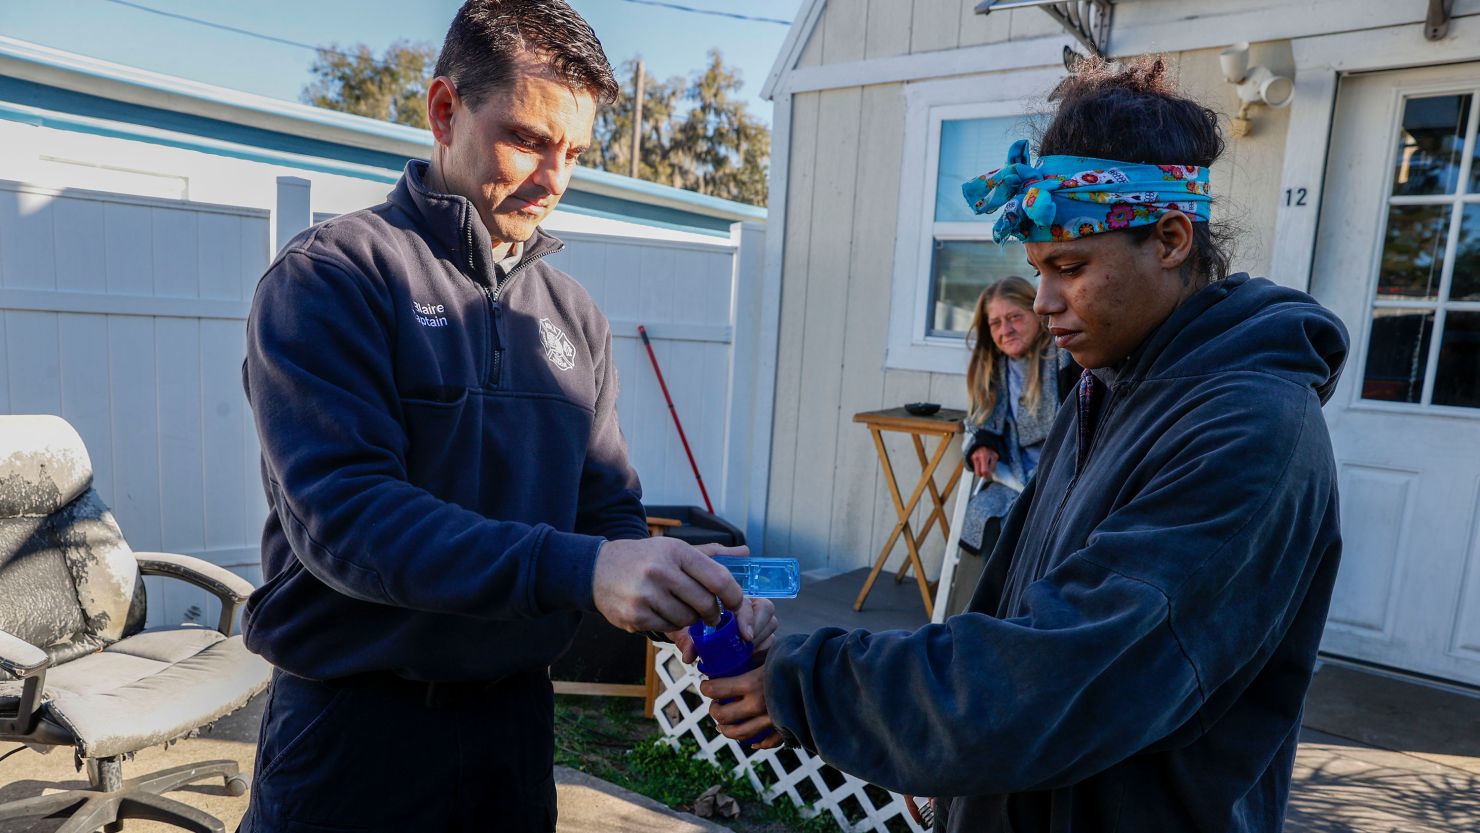 Ocala Fire Rescue EMS Capt. Jesse Blaire gives medication to Shawnice Slaughter, who is working to recover from a substance use disorder through Florida's Coordinated Opioid Recovery Network, at her home.